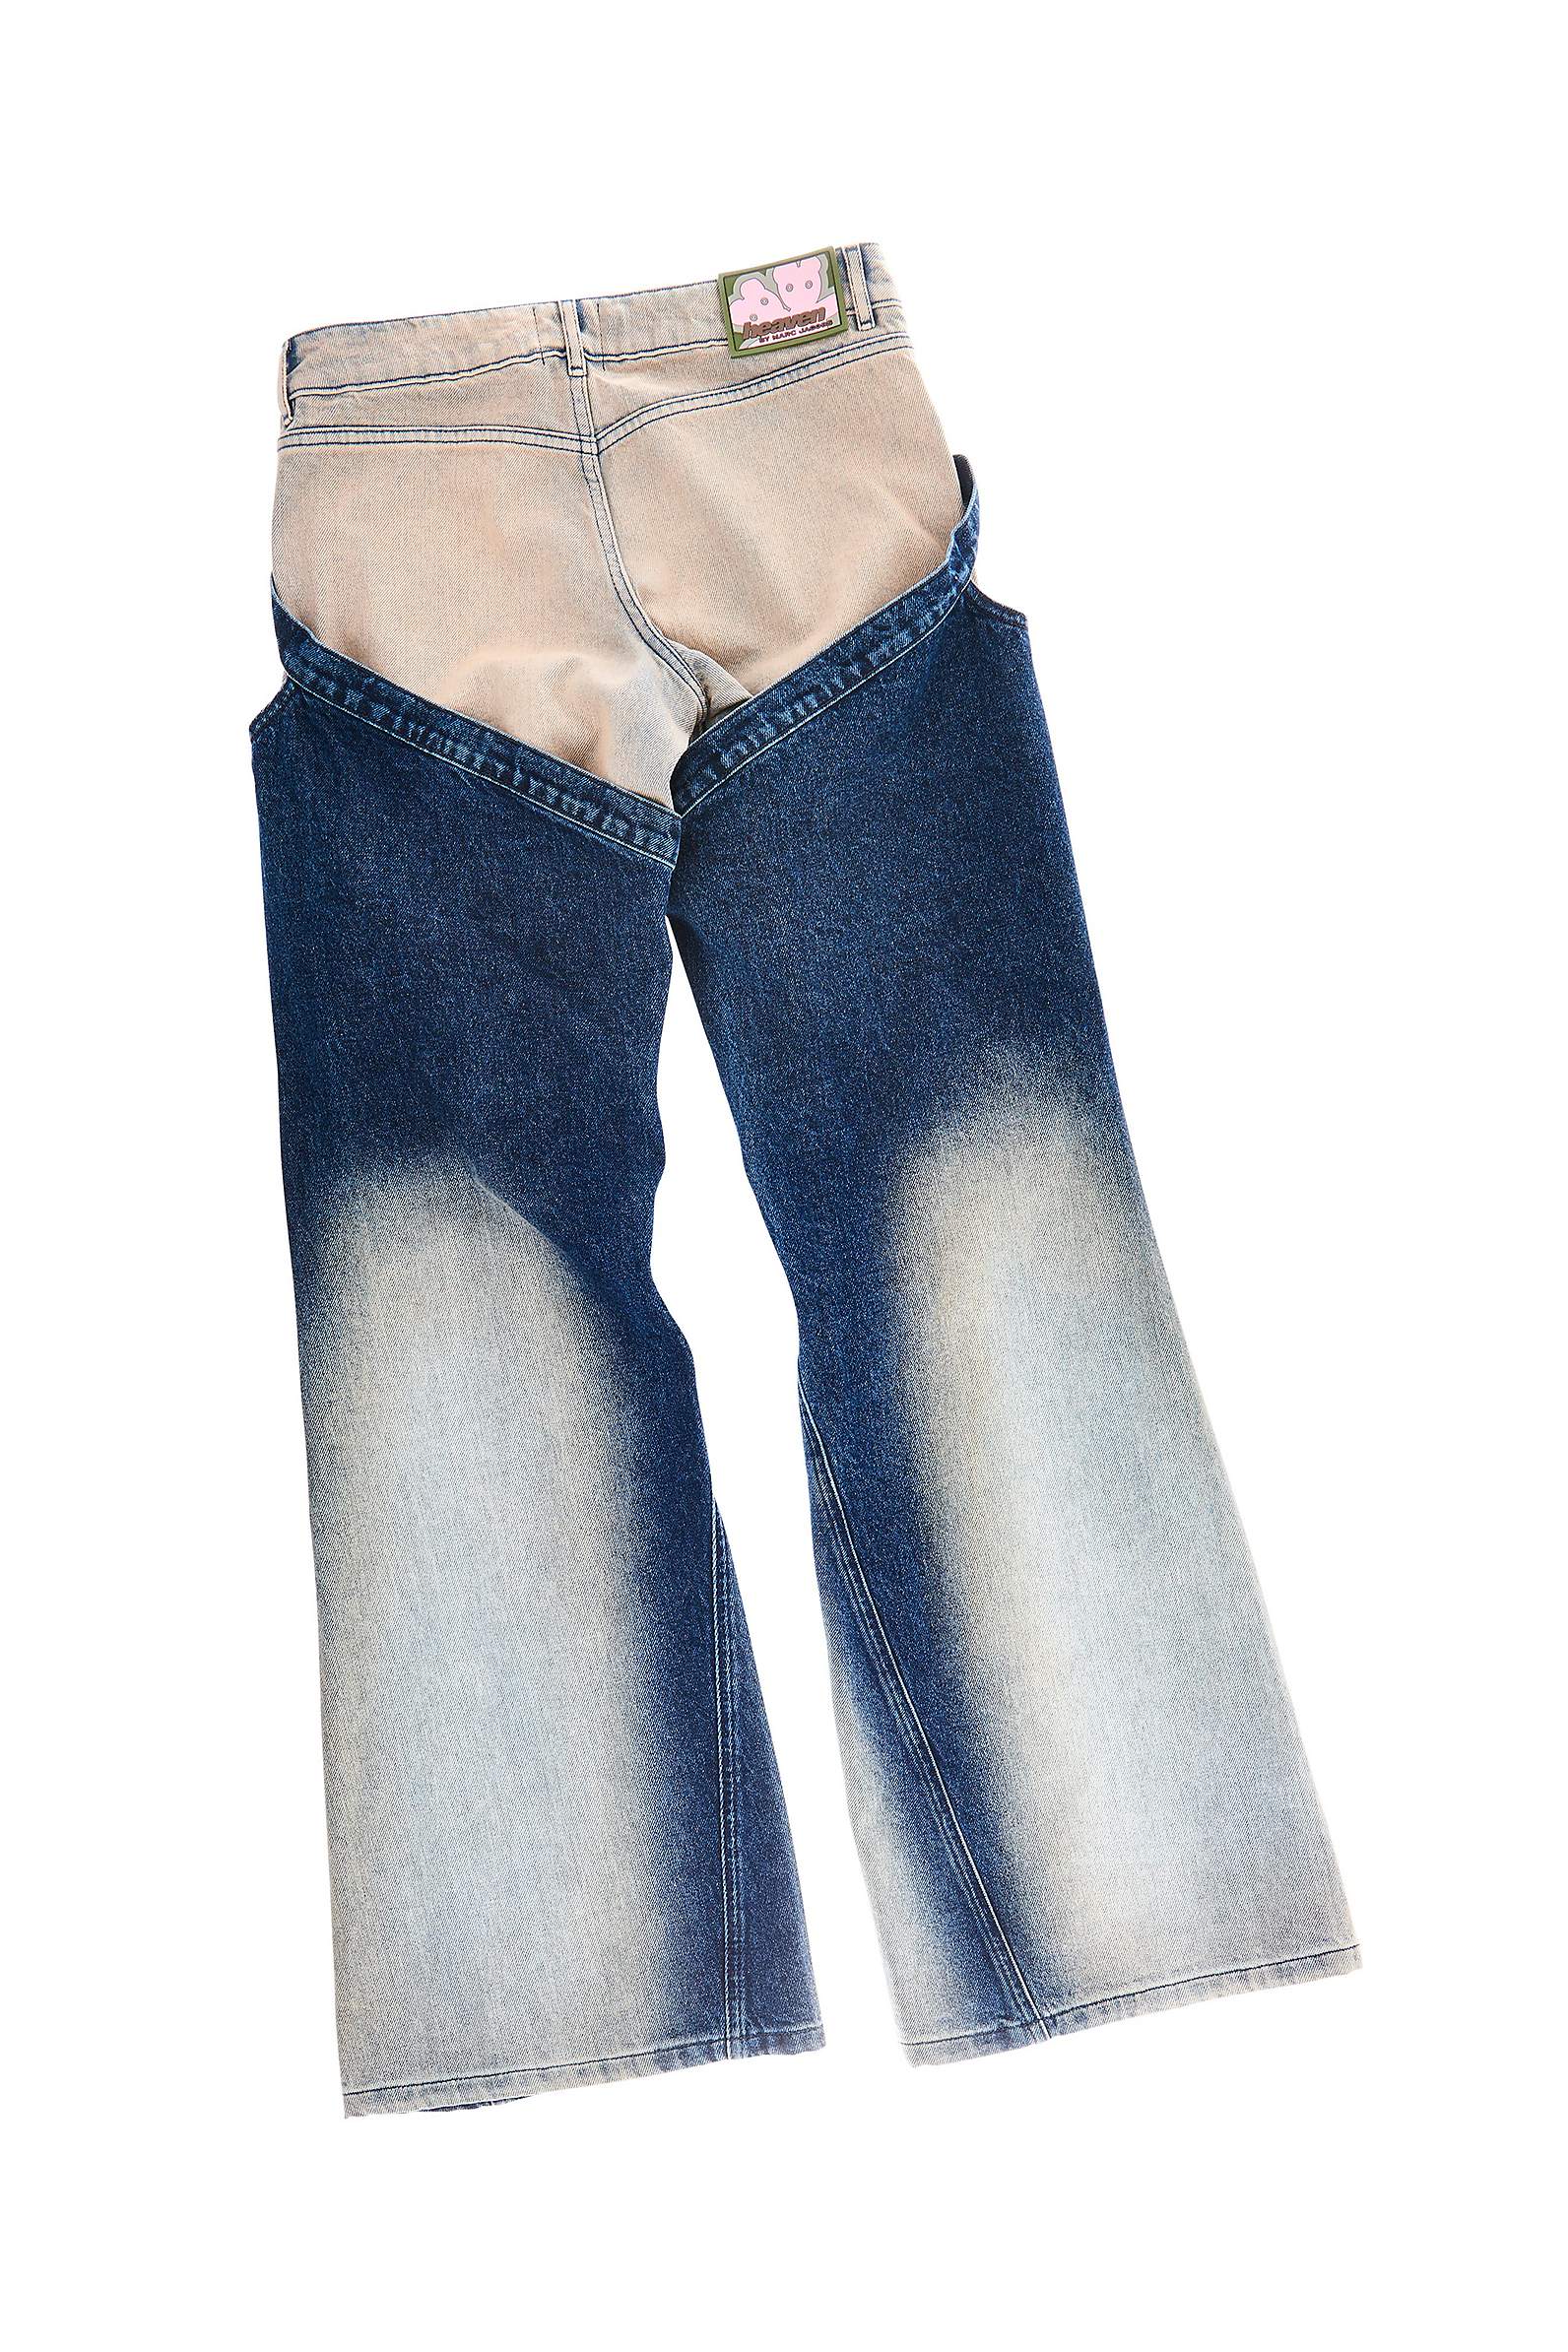 Marc Jacobs Blue 'The Washed Monogram' Jeans